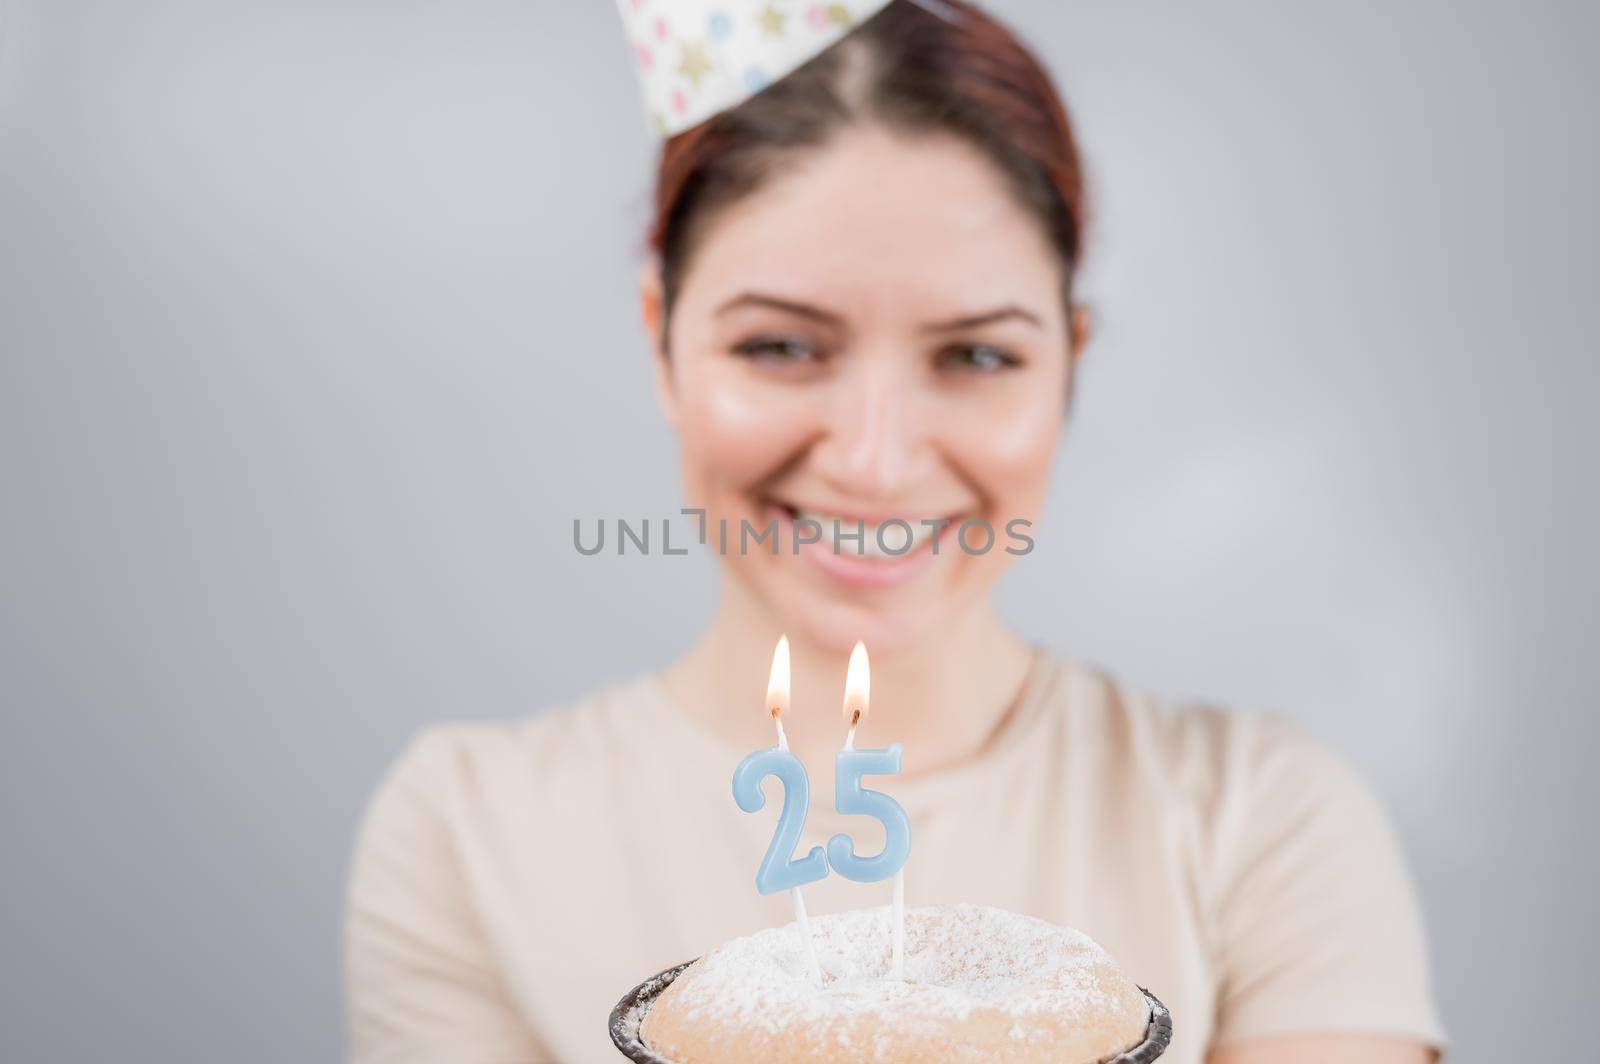 The happy woman makes a wish and blows out the candles on the 25th birthday cake. Girl celebrating birthday. by mrwed54